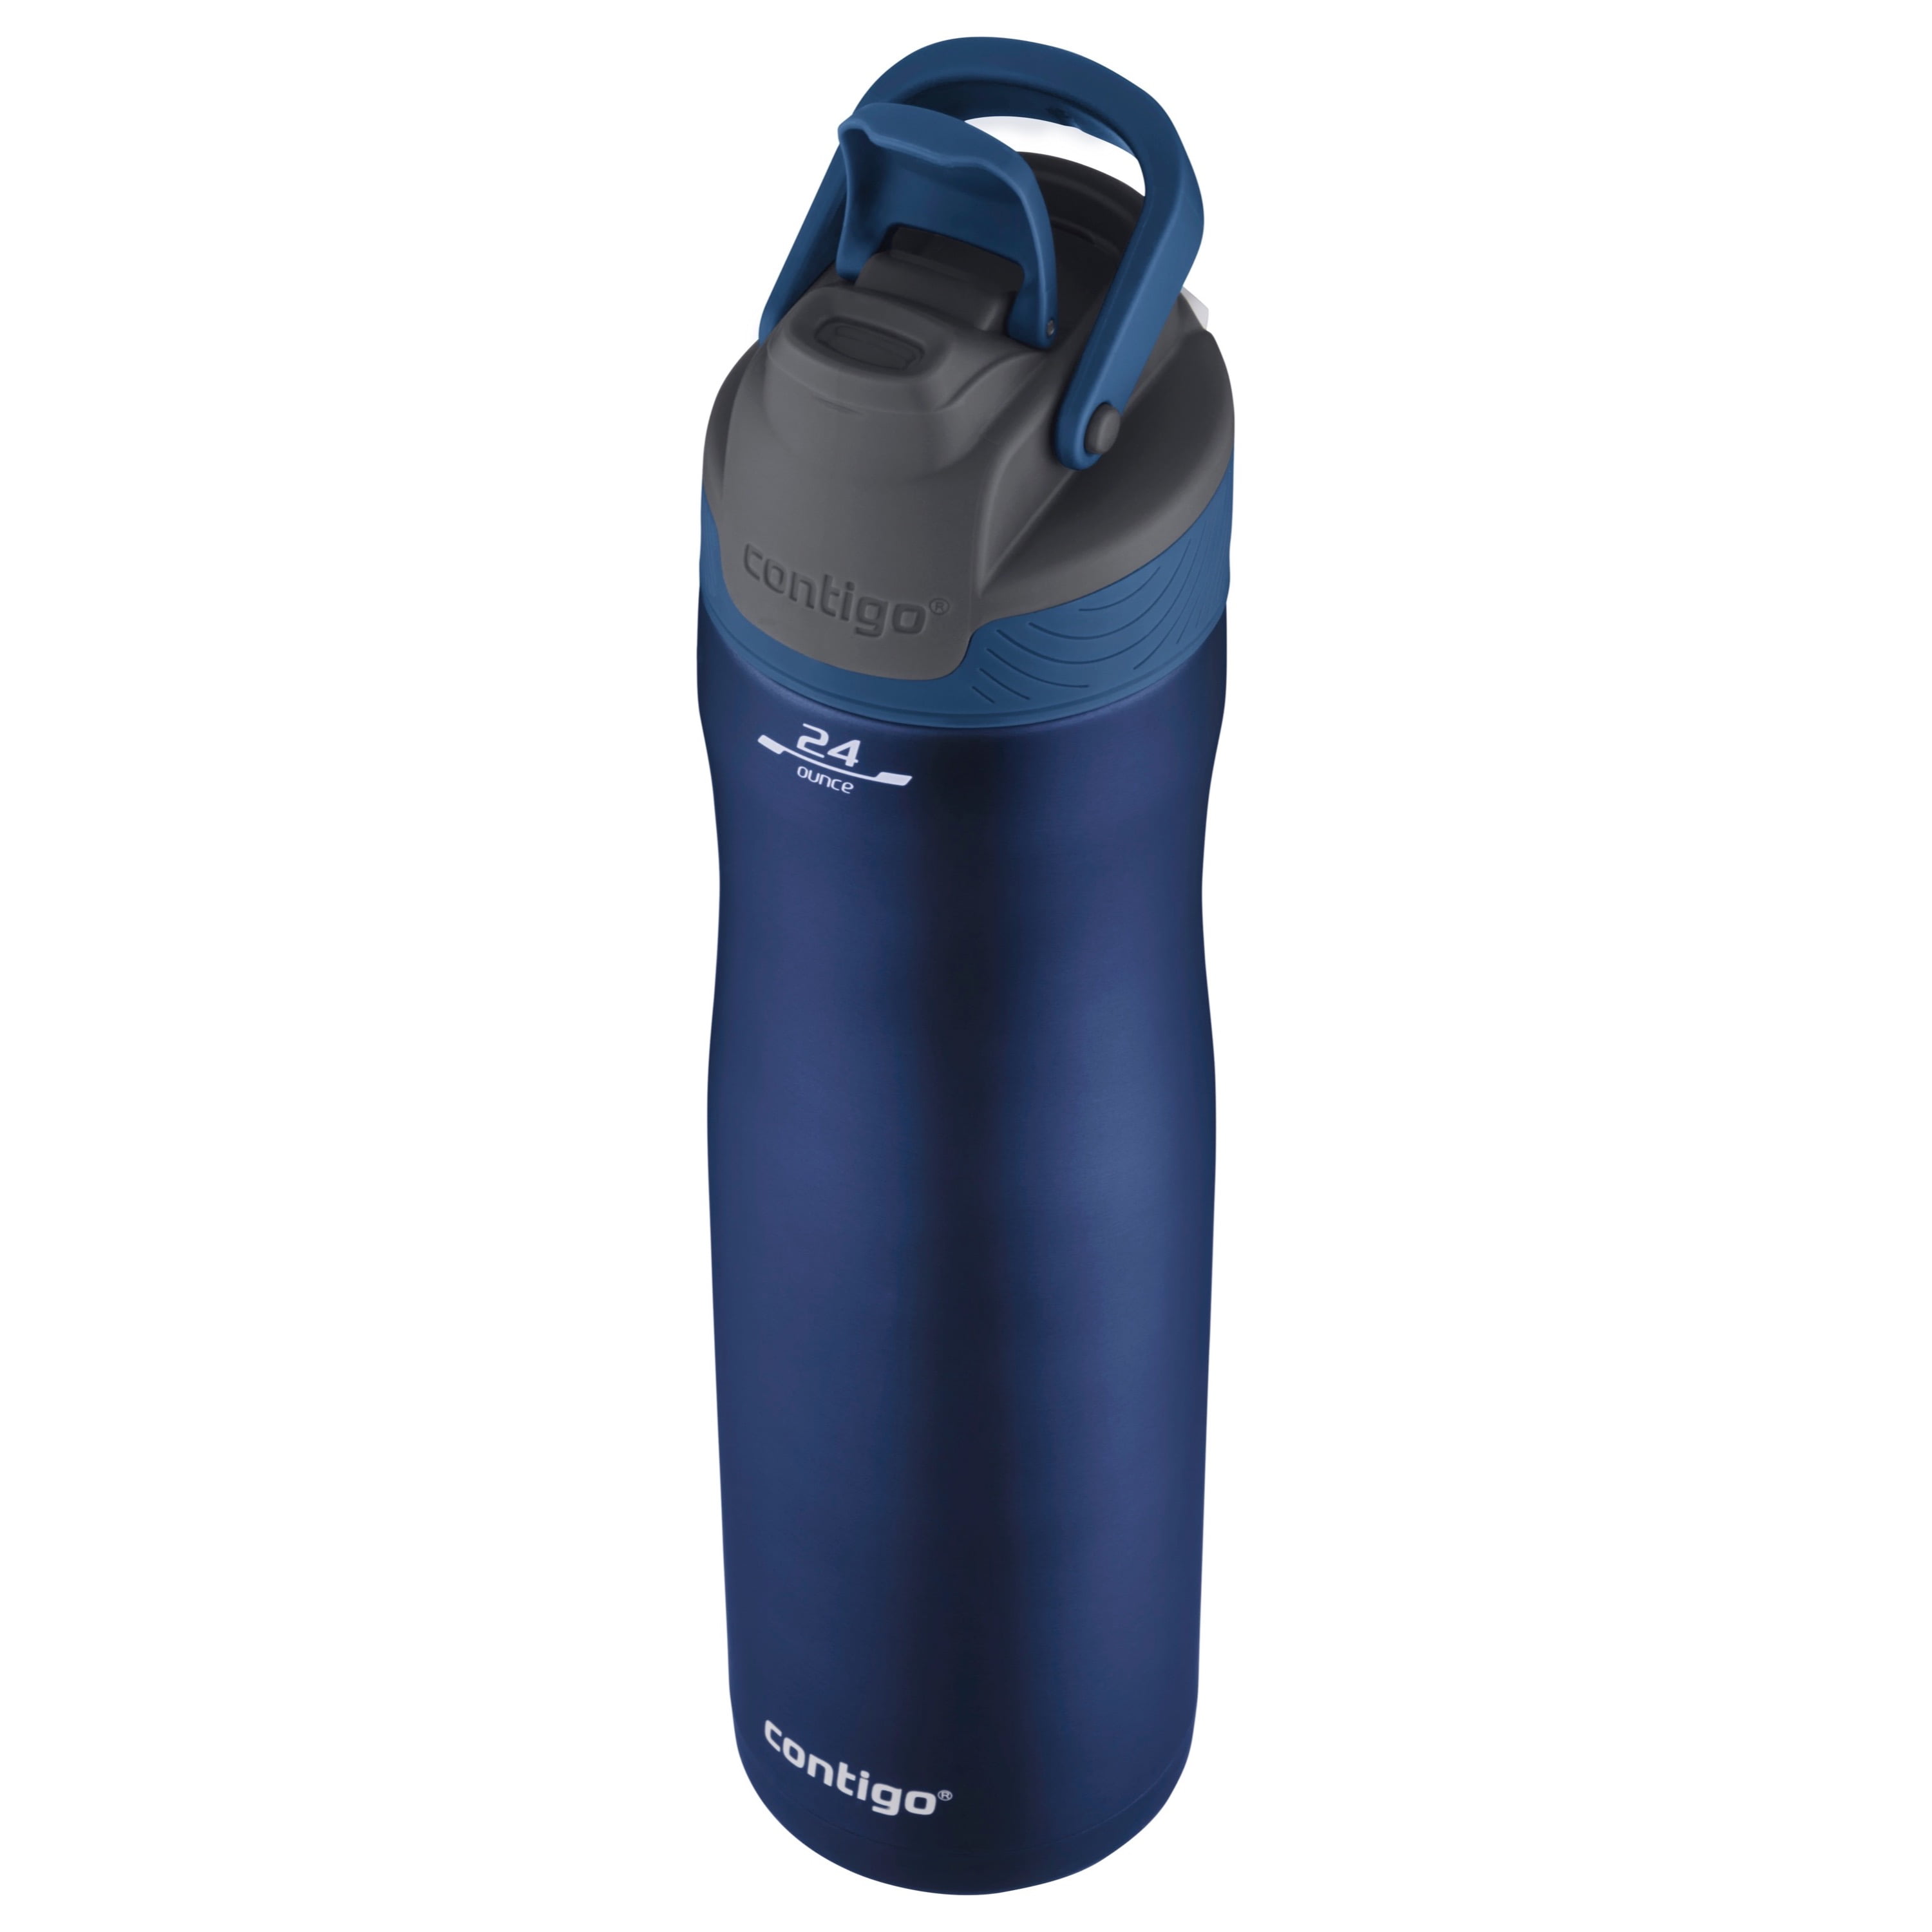  Contigo Autoseal Chill Vacuum-Insulated Stainless Steel Water  Bottle, 24 Oz., Monaco : Sports & Outdoors